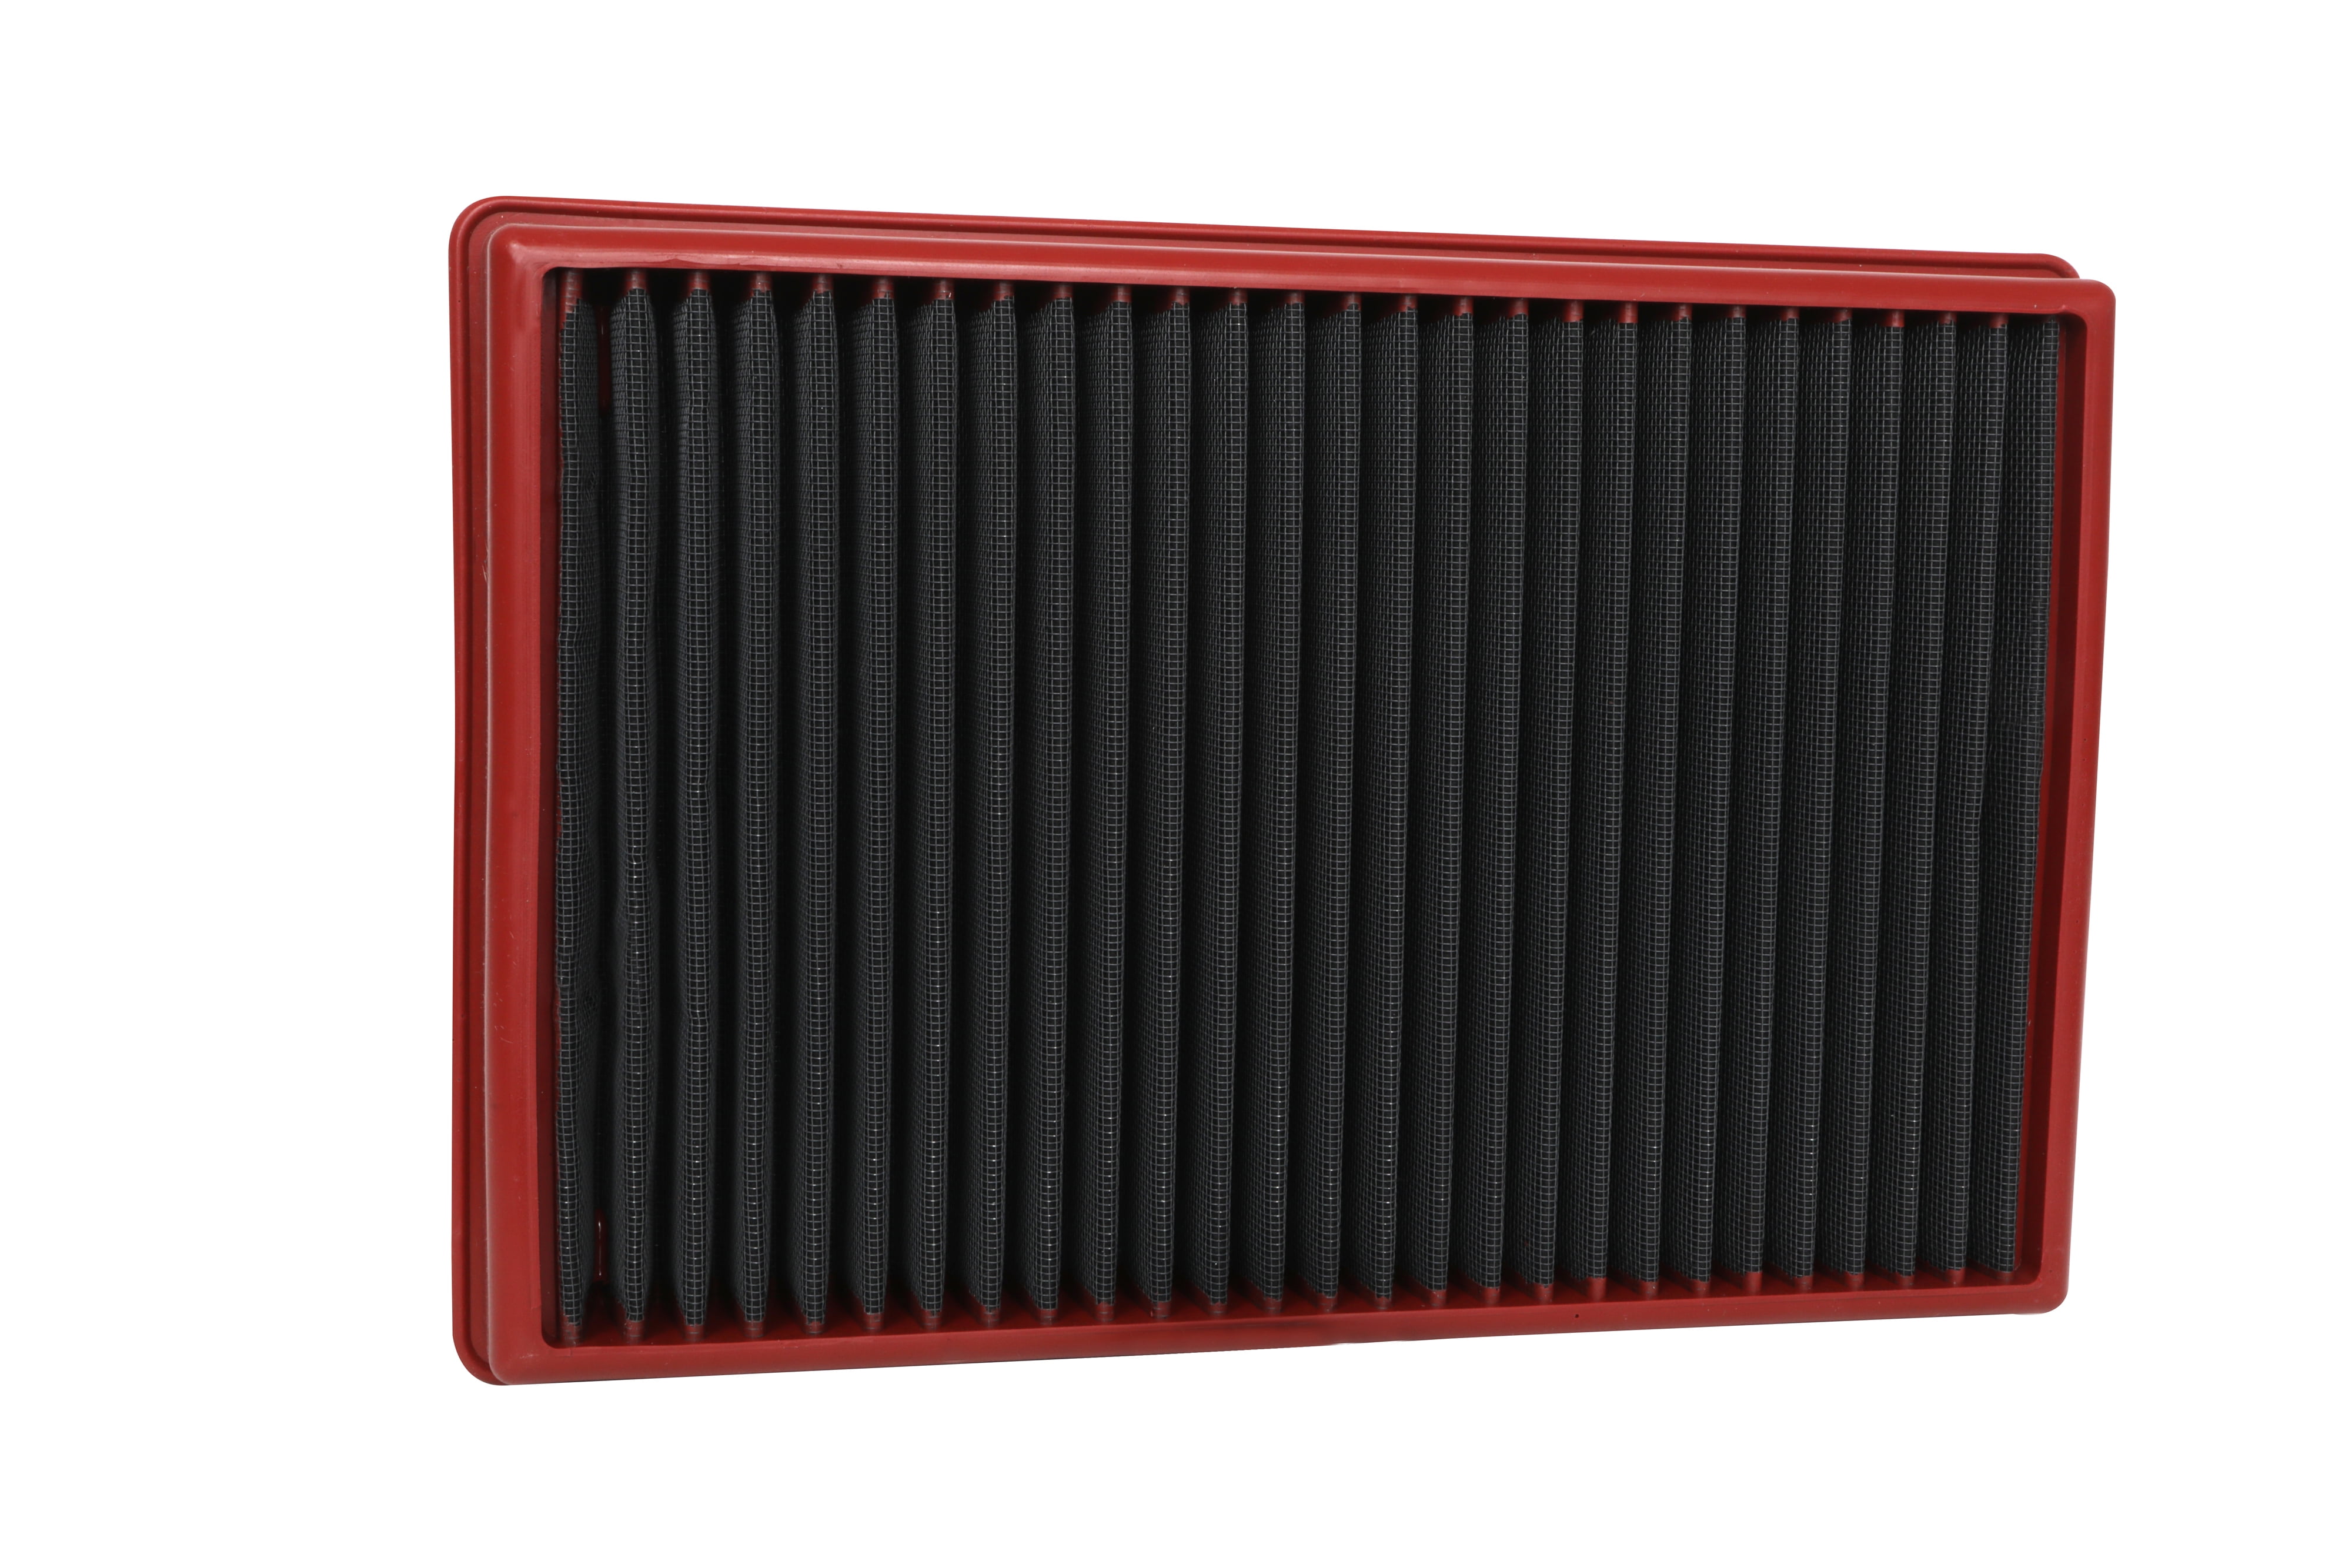 K&N OE Replacement Performance Air Filter Element 33-3054